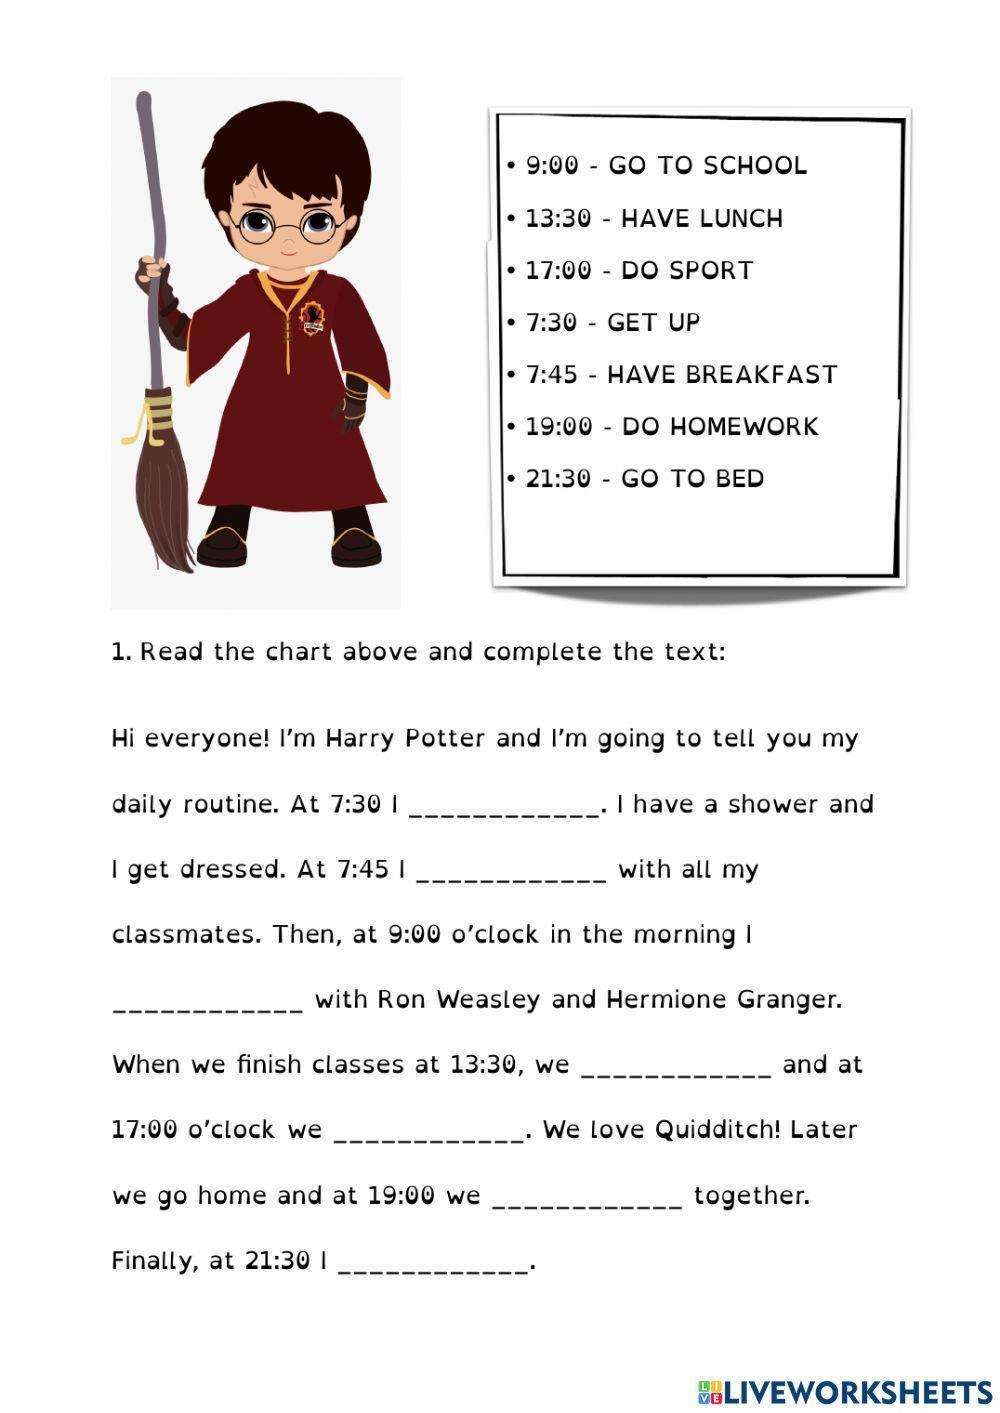 Harry Potter's daily Routine